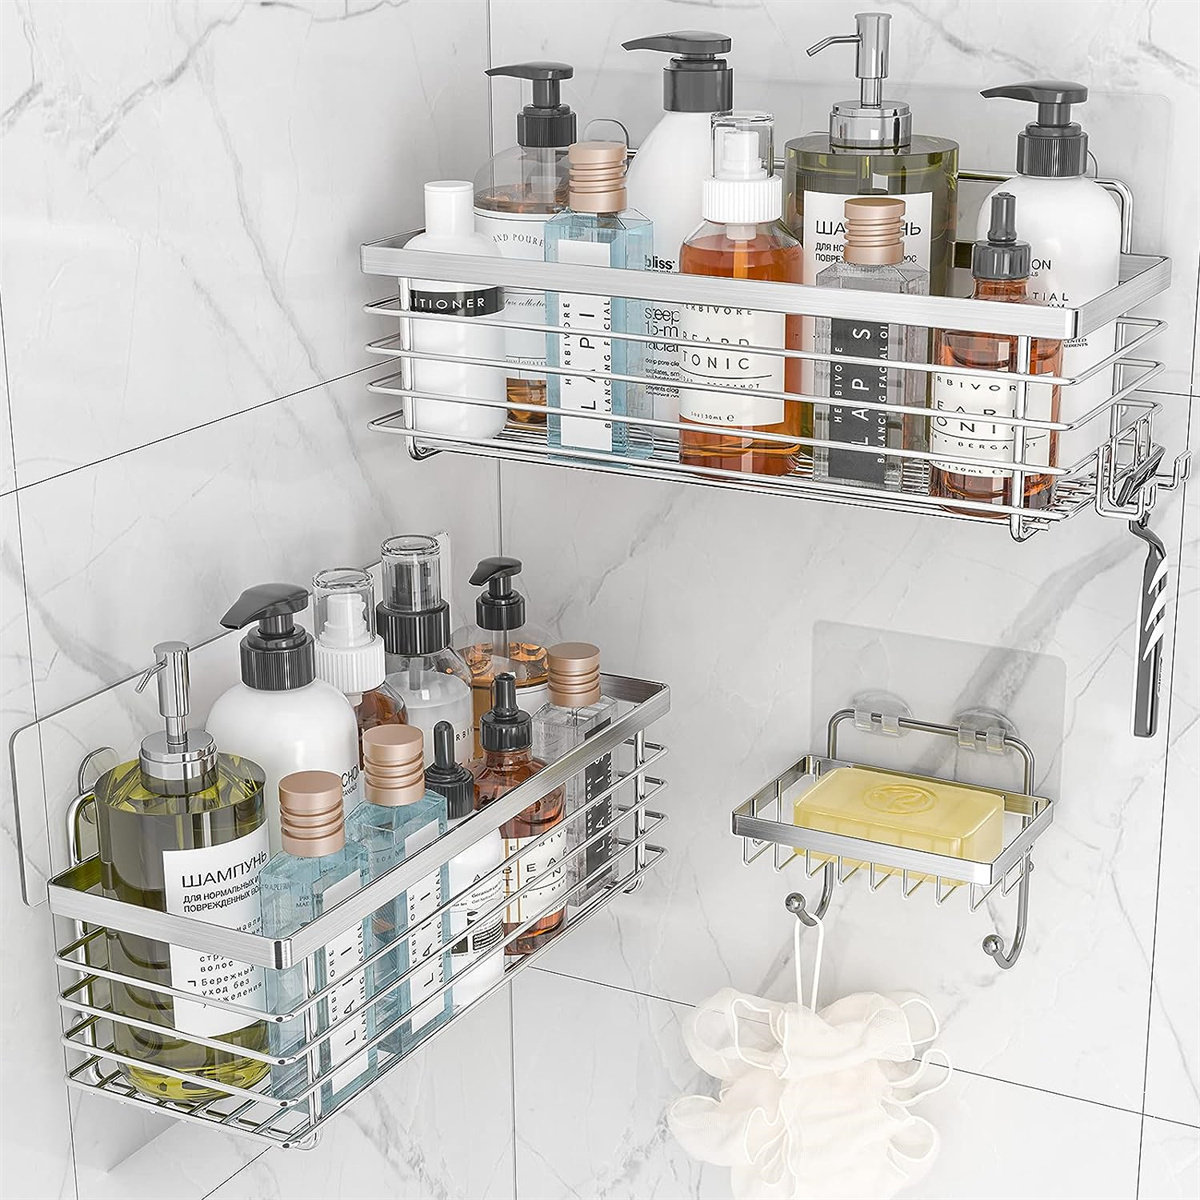 Callula Wall Mounted Stainless Steel Shower Caddy Basket Shelf For